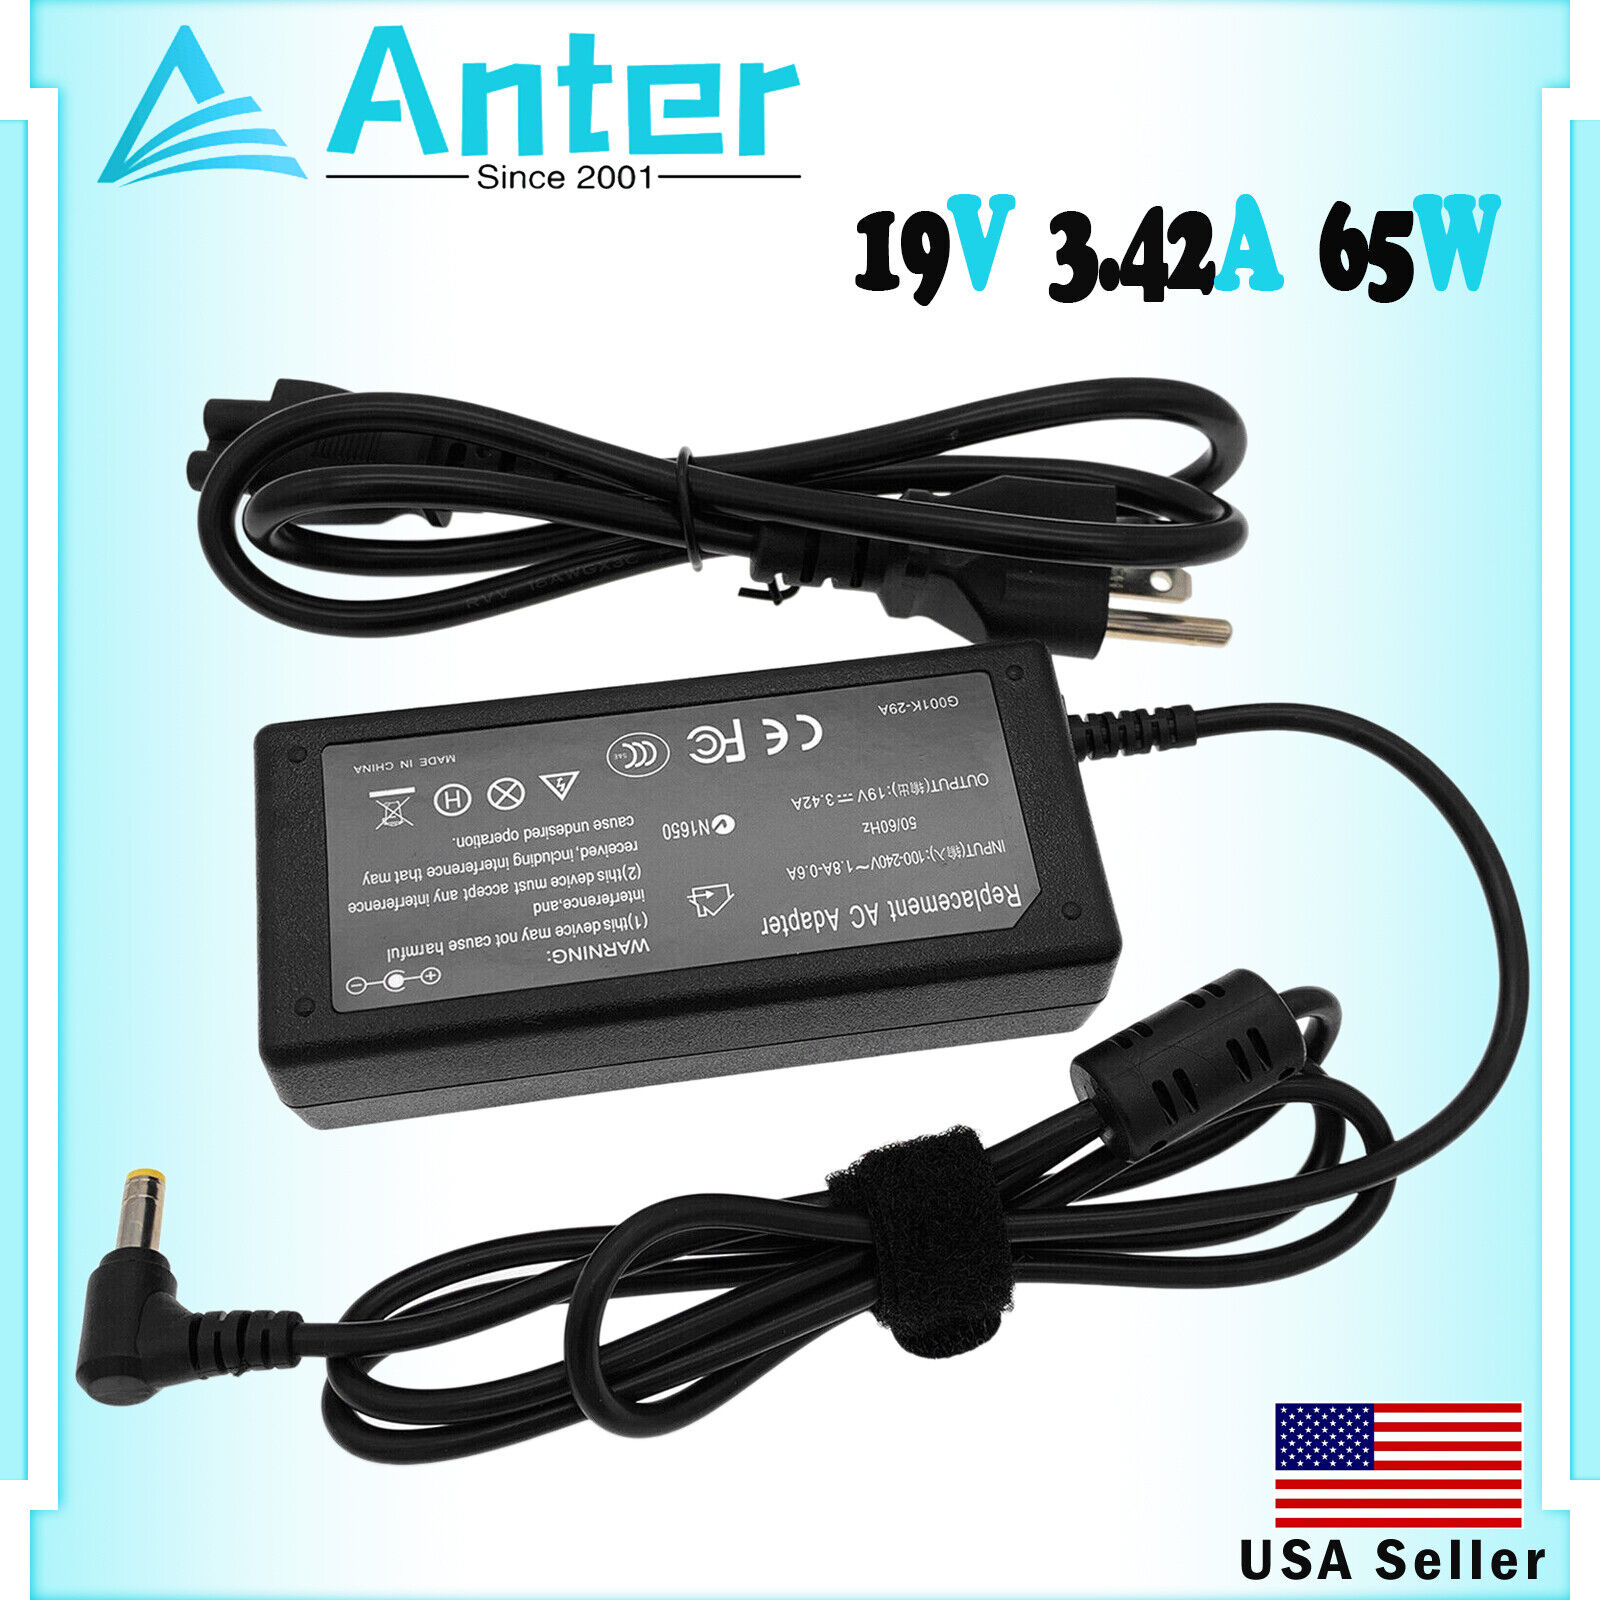 AC Adapter Charger for IBM/Lenovo ThinkPad 3000 Y410 Type 7757 G530-4151 4446